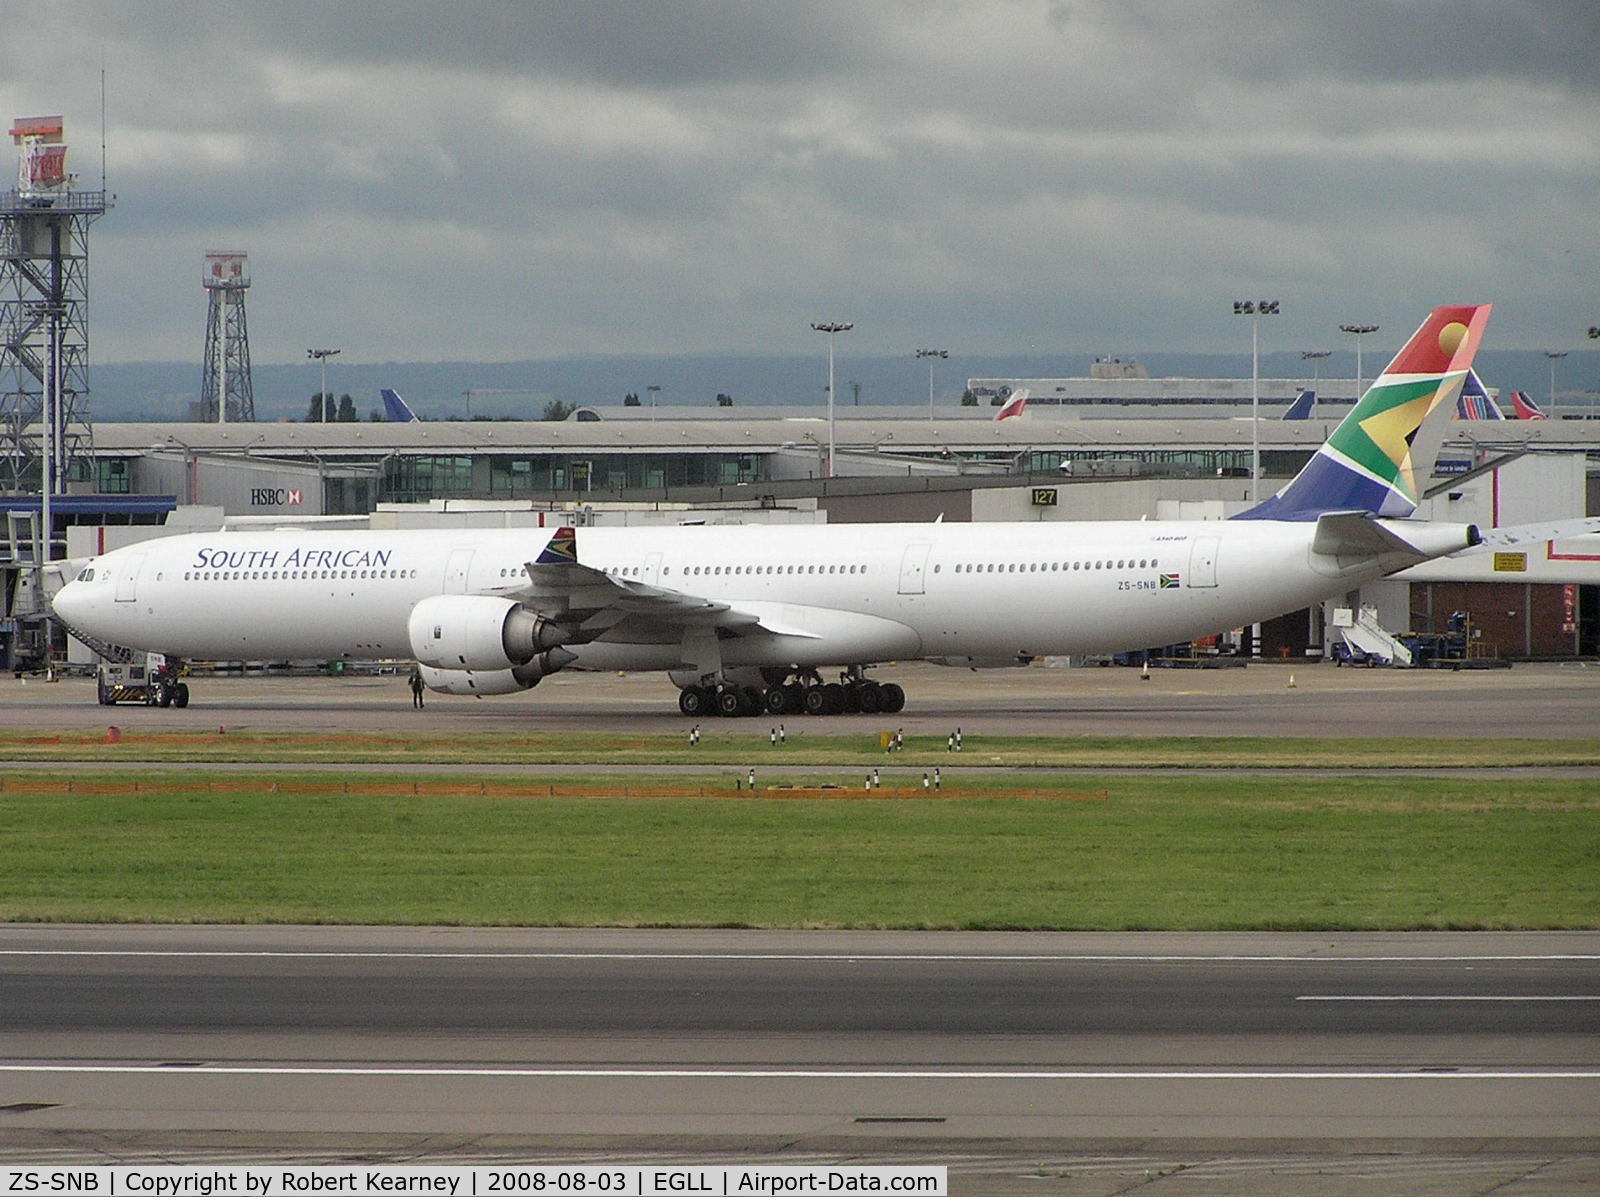 ZS-SNB, 2002 Airbus A340-642 C/N 417, Sotuh African starting up